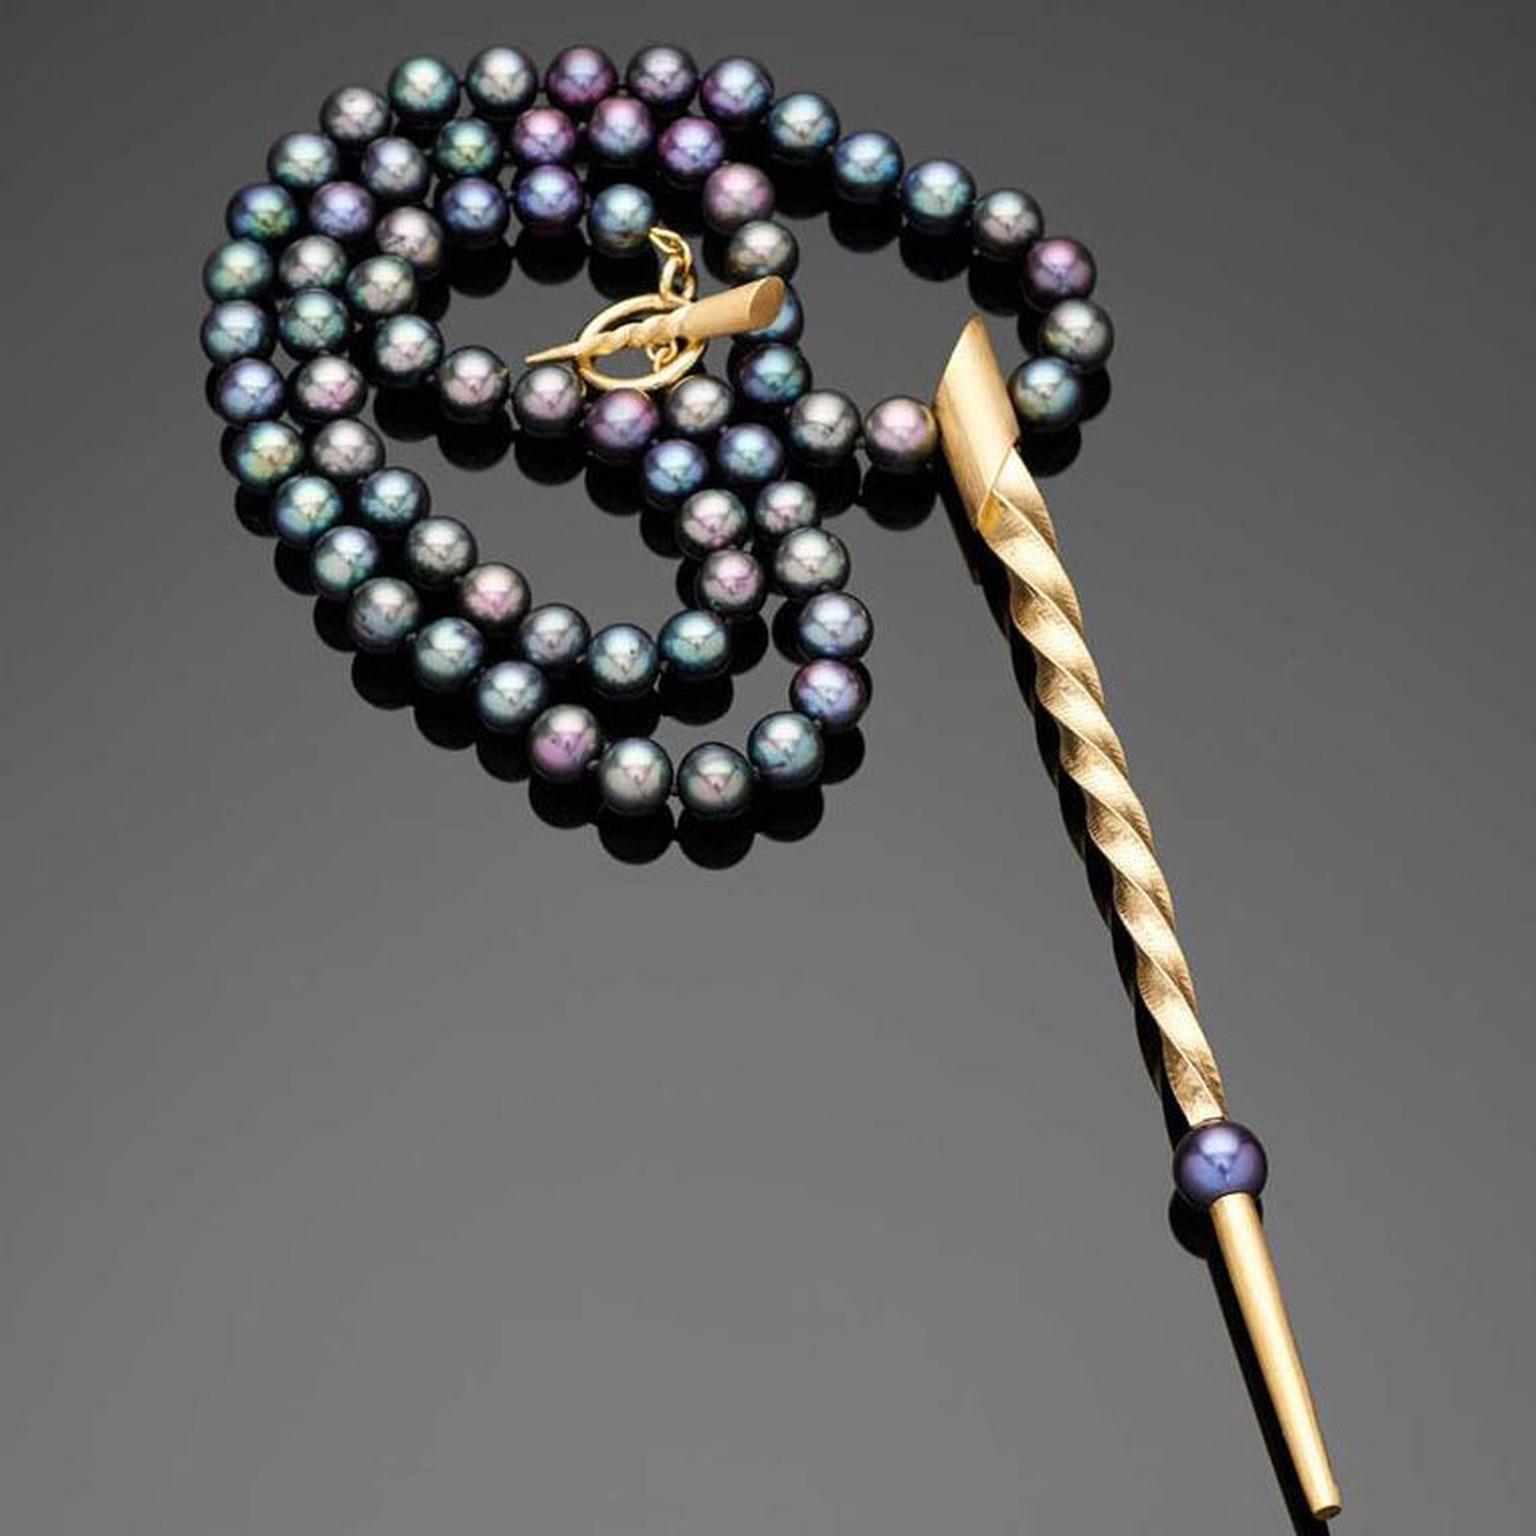 Flora Bhattachary Chauri Pearl String Necklace featuring peacock Tahitian pearls.